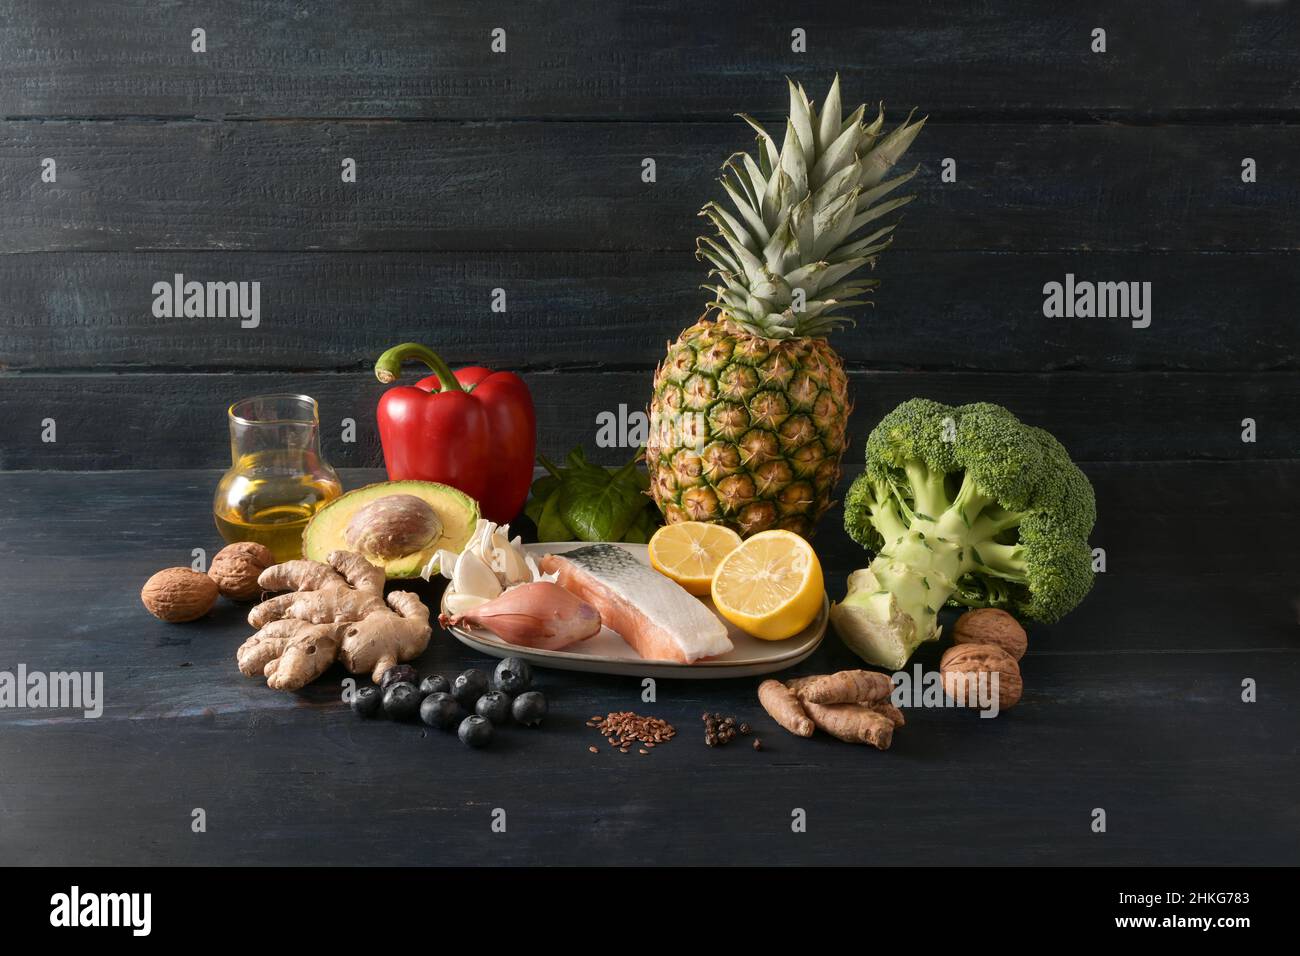 Food for health, vegetables, fish, fruits, nuts and spices for an anti-inflammatory and antioxidant diet, dark rustic wooden background with copy spac Stock Photo